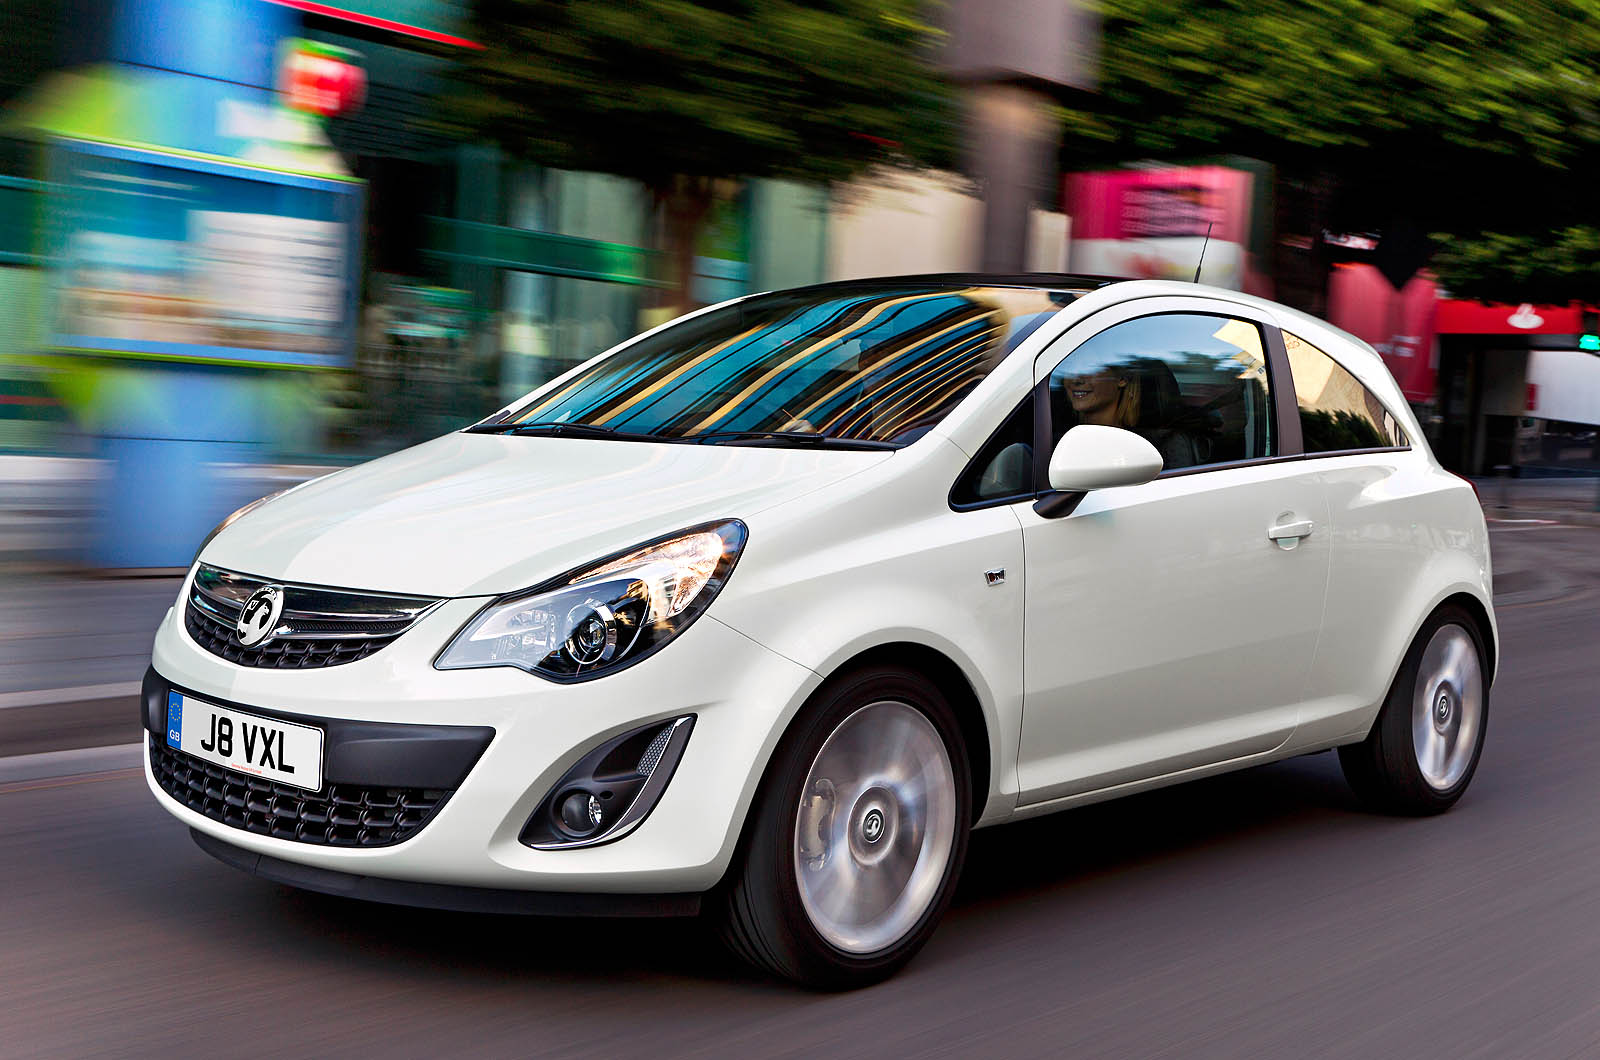 Vauxhall Corsa gets a 2010 eco facelift